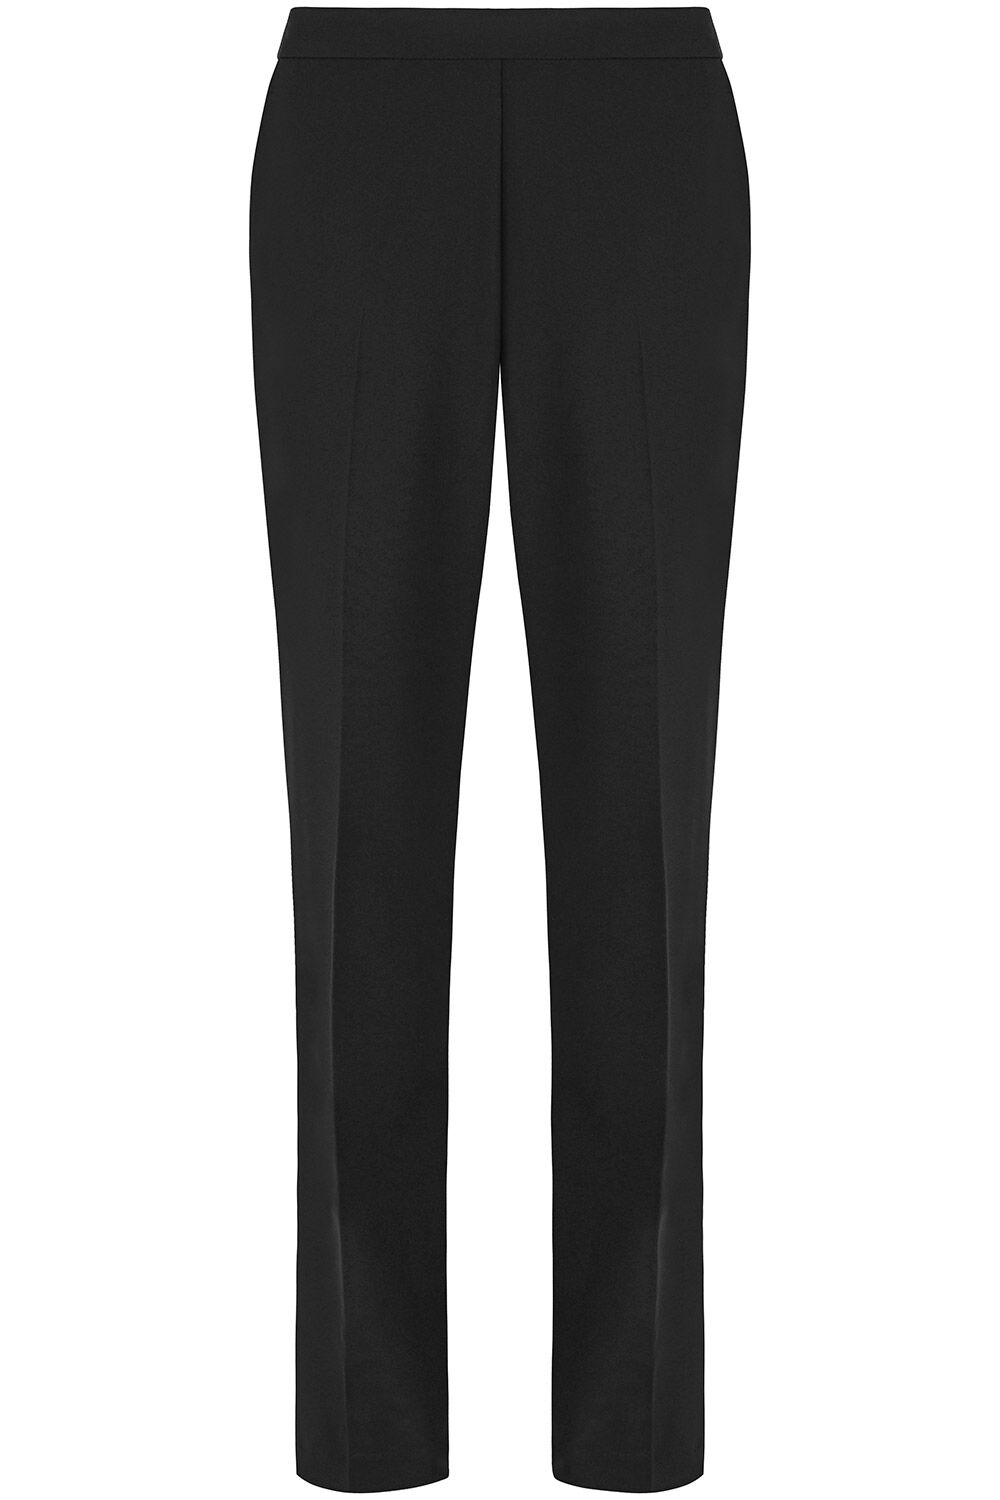 Bonmarche Black Straight Leg Pull-On Elasticated Trousers, Size: 18